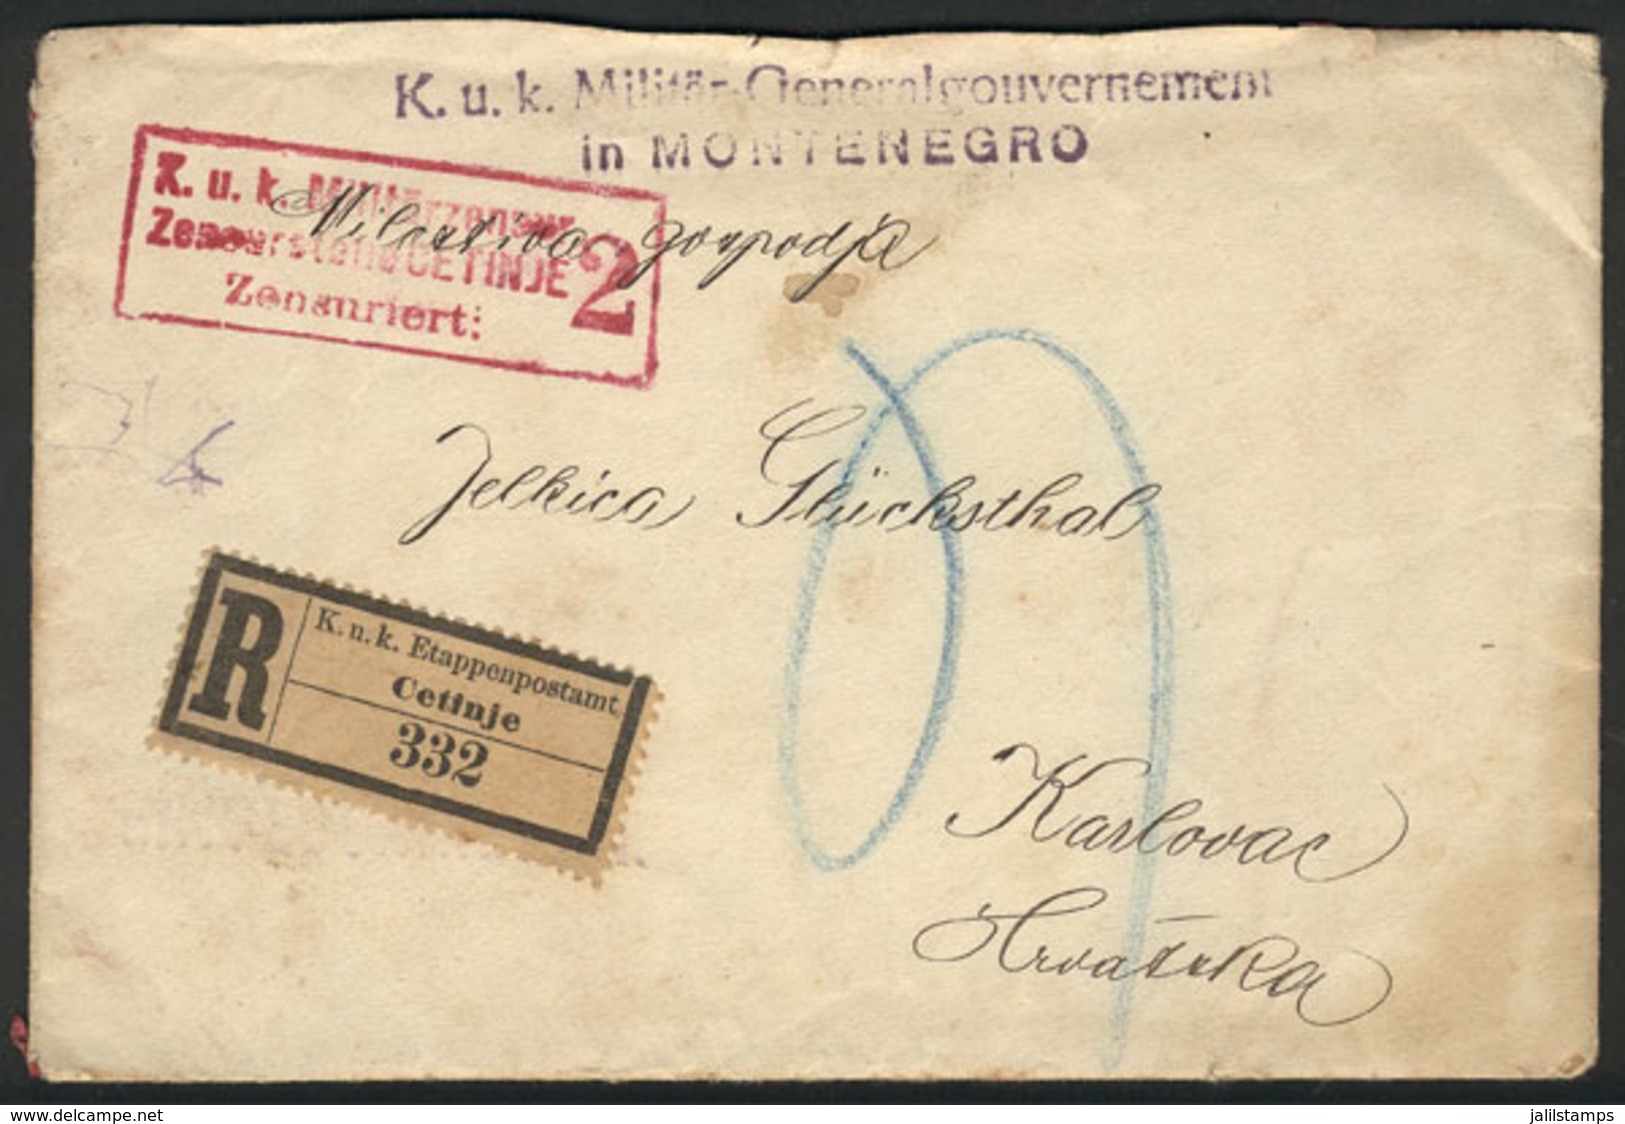 MONTENEGRO: Registered Cover Posted Stampless In 1918 (with Military Franchise) From CETINJE To Karlovac, Interesting CE - Montenegro